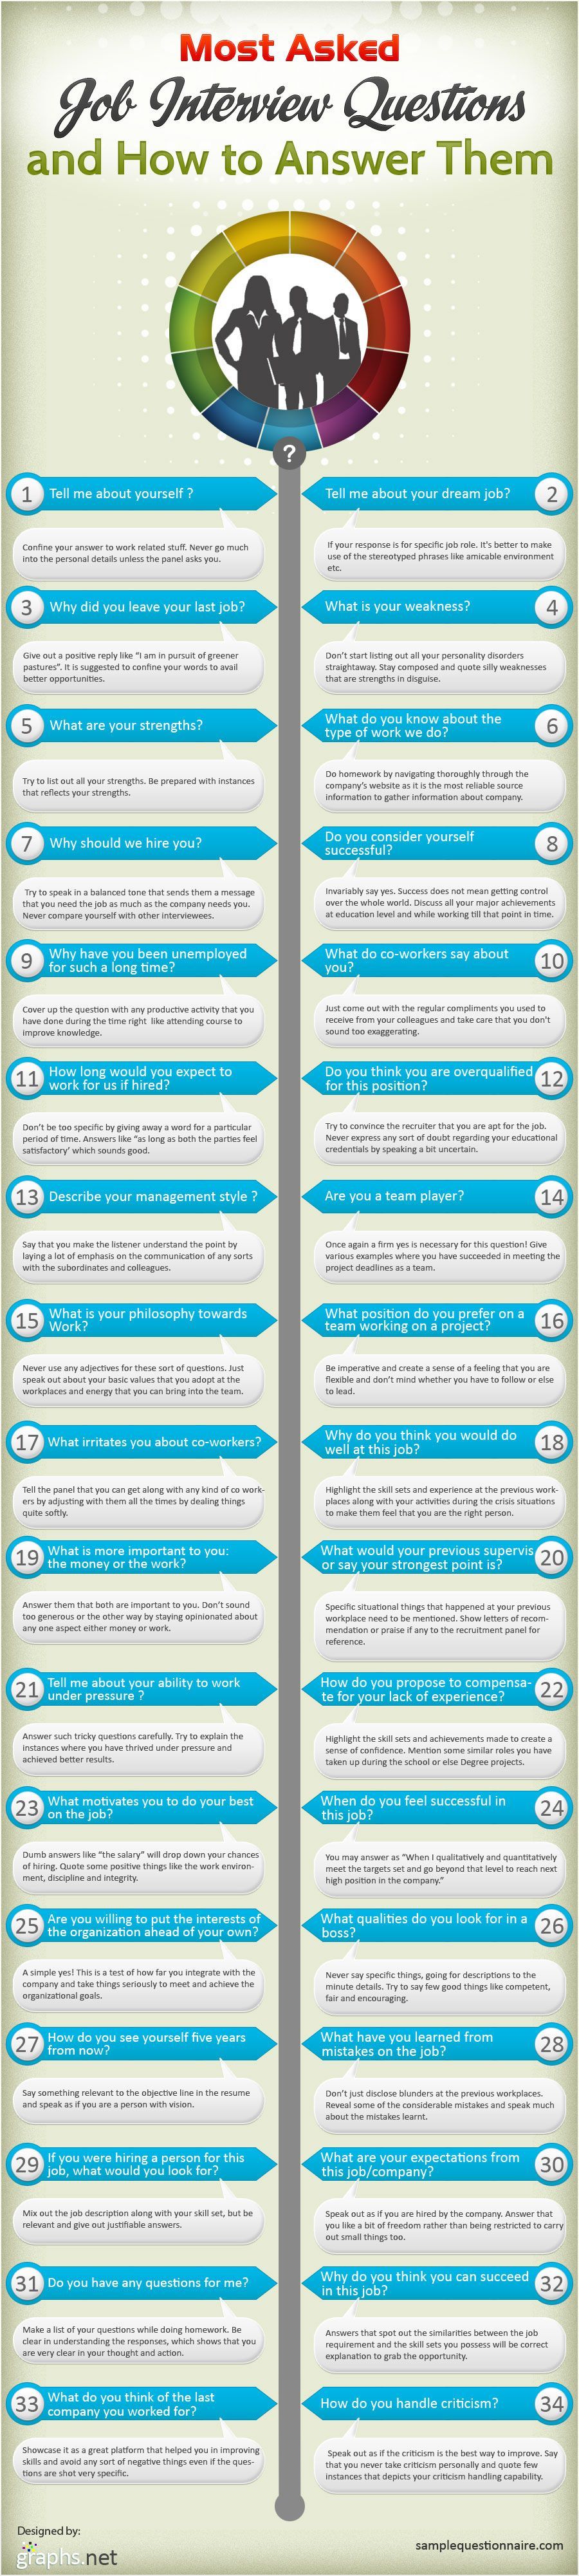 Most asked interview questions and how to answer them